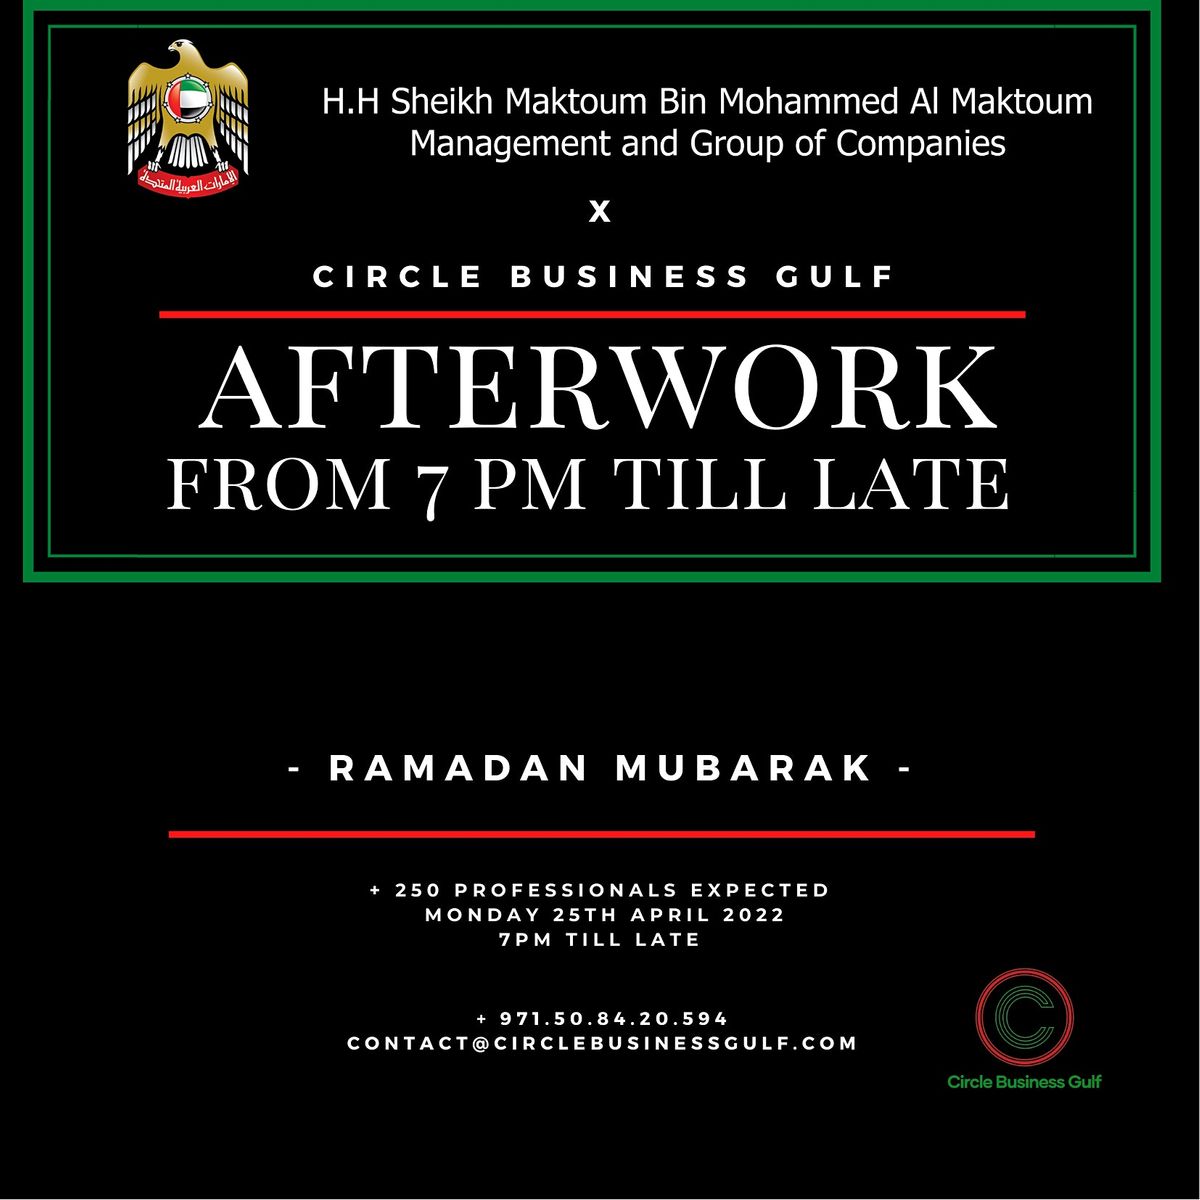 FABULOUS AFTERWORK & SPEED MEETING OF THE CIRCLE BUSINESS GULF